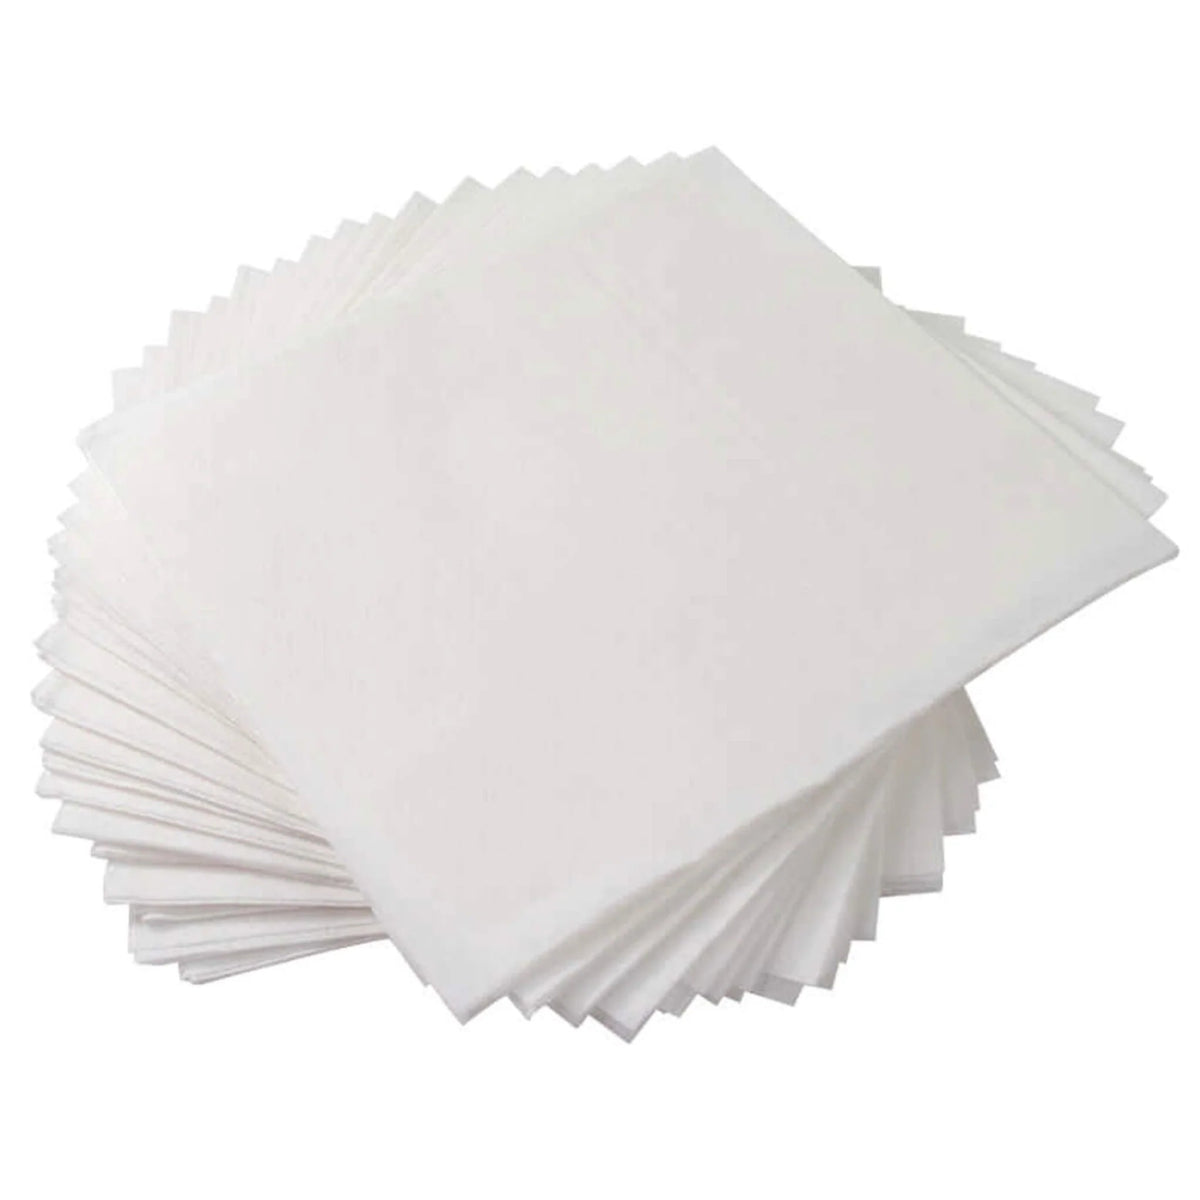 Dry Disposable Washcloths 12 x 13" (50pc)